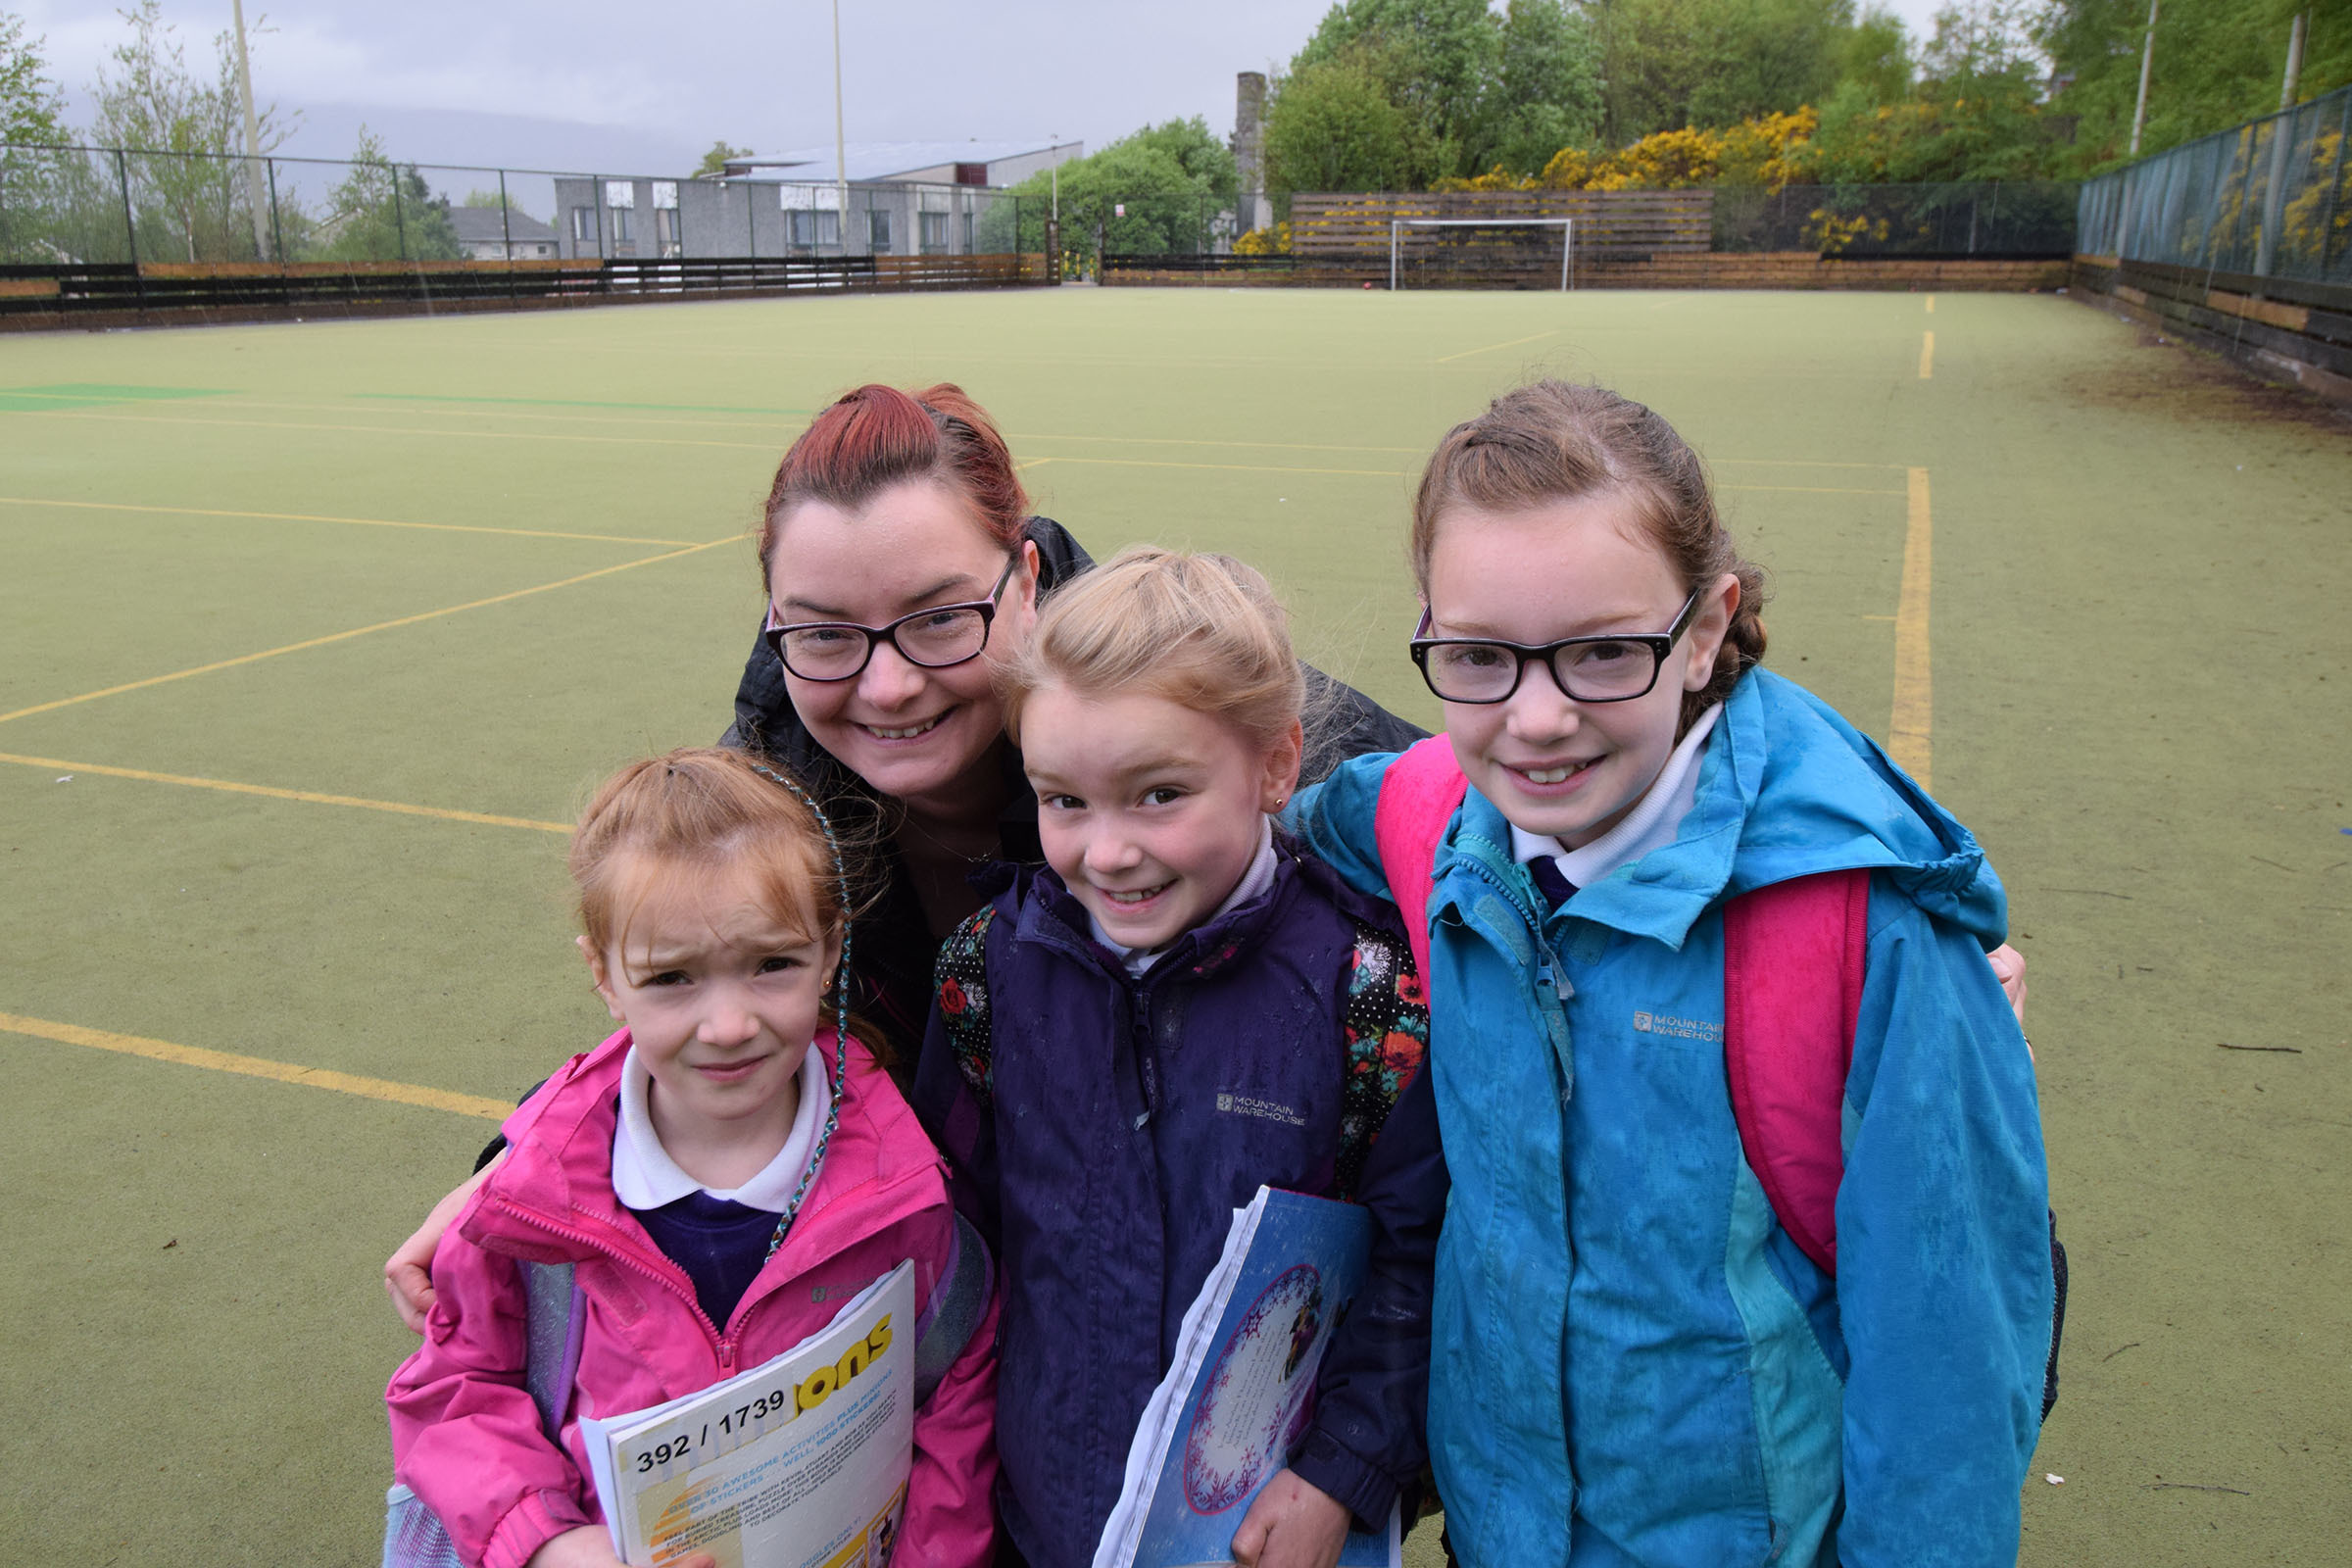 Wendy Lev with her daughters (left to right) Lana, Maya, and Adi at Upper Achintore astro pitch when they launched the petition to save it